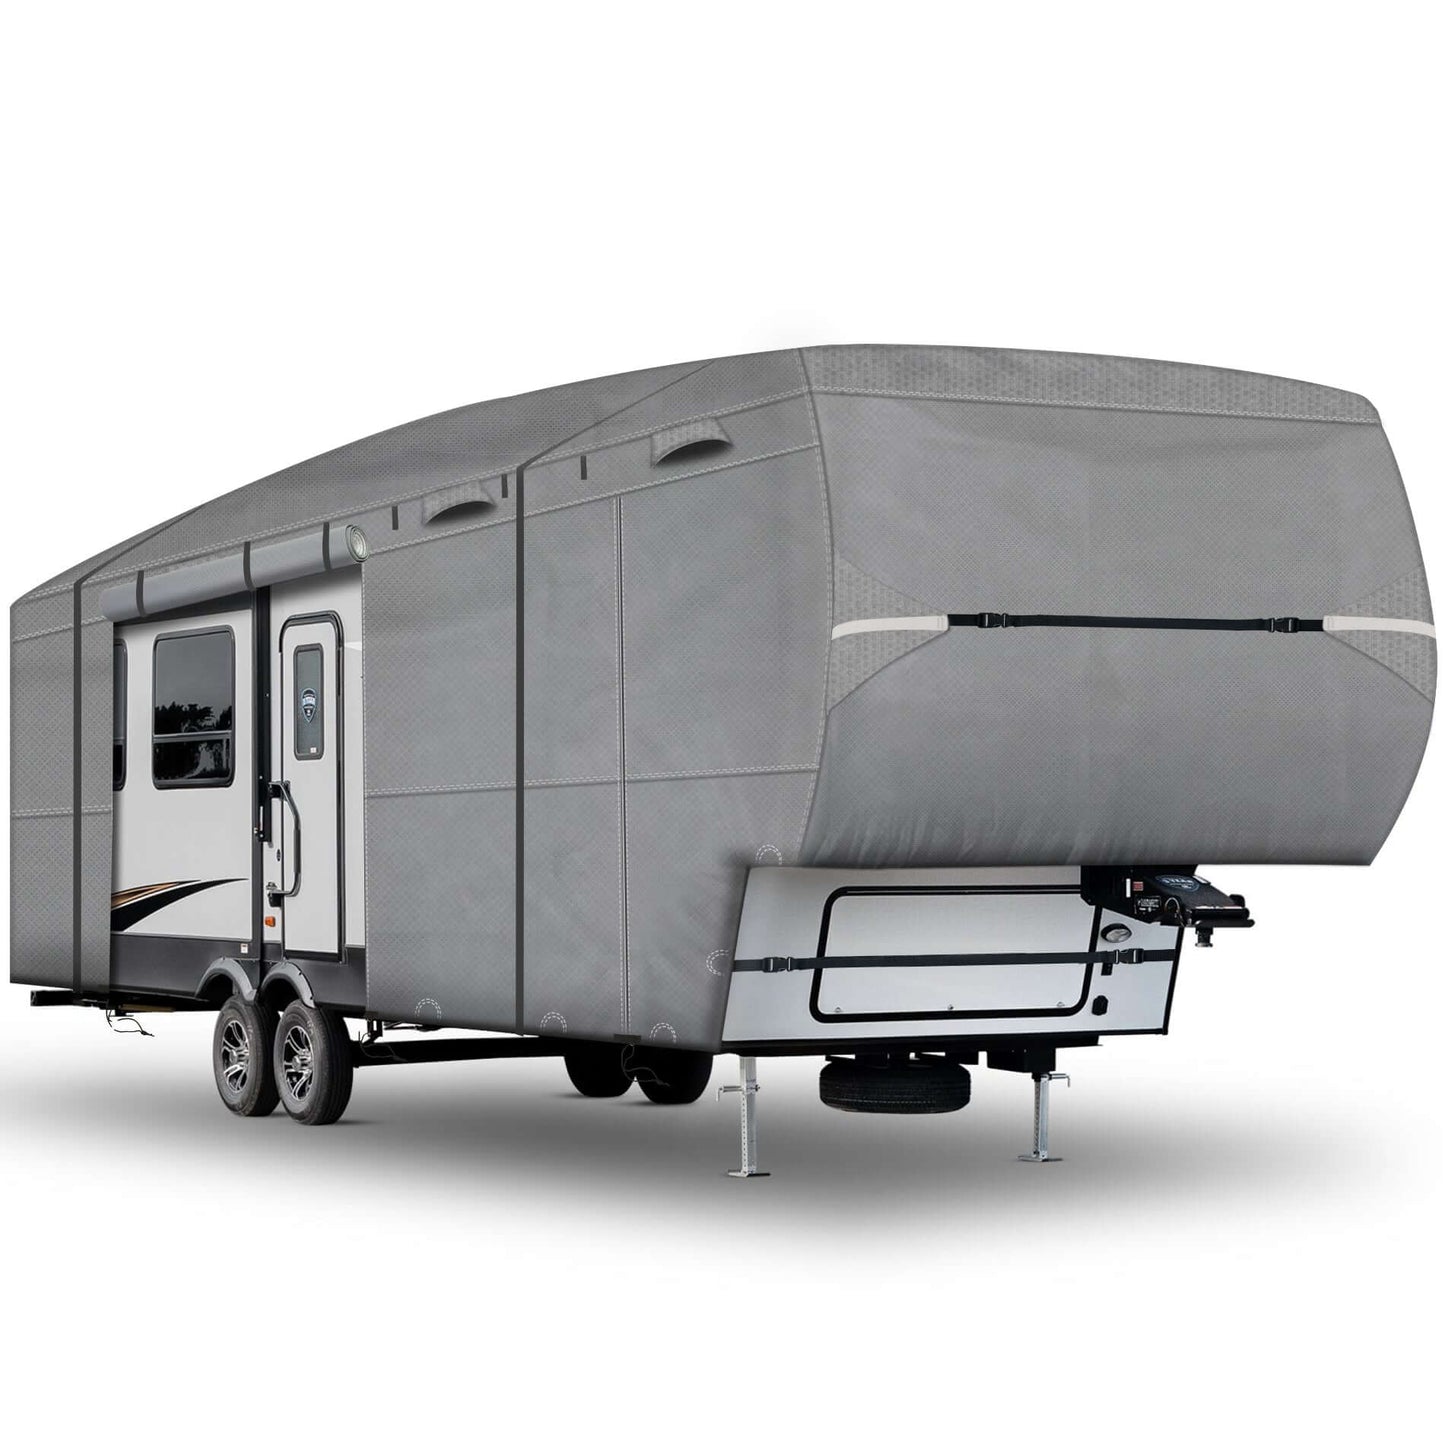 Camper Covers | 5th Fifth Wheel RV Covers 7 Layers Winter Waterproof